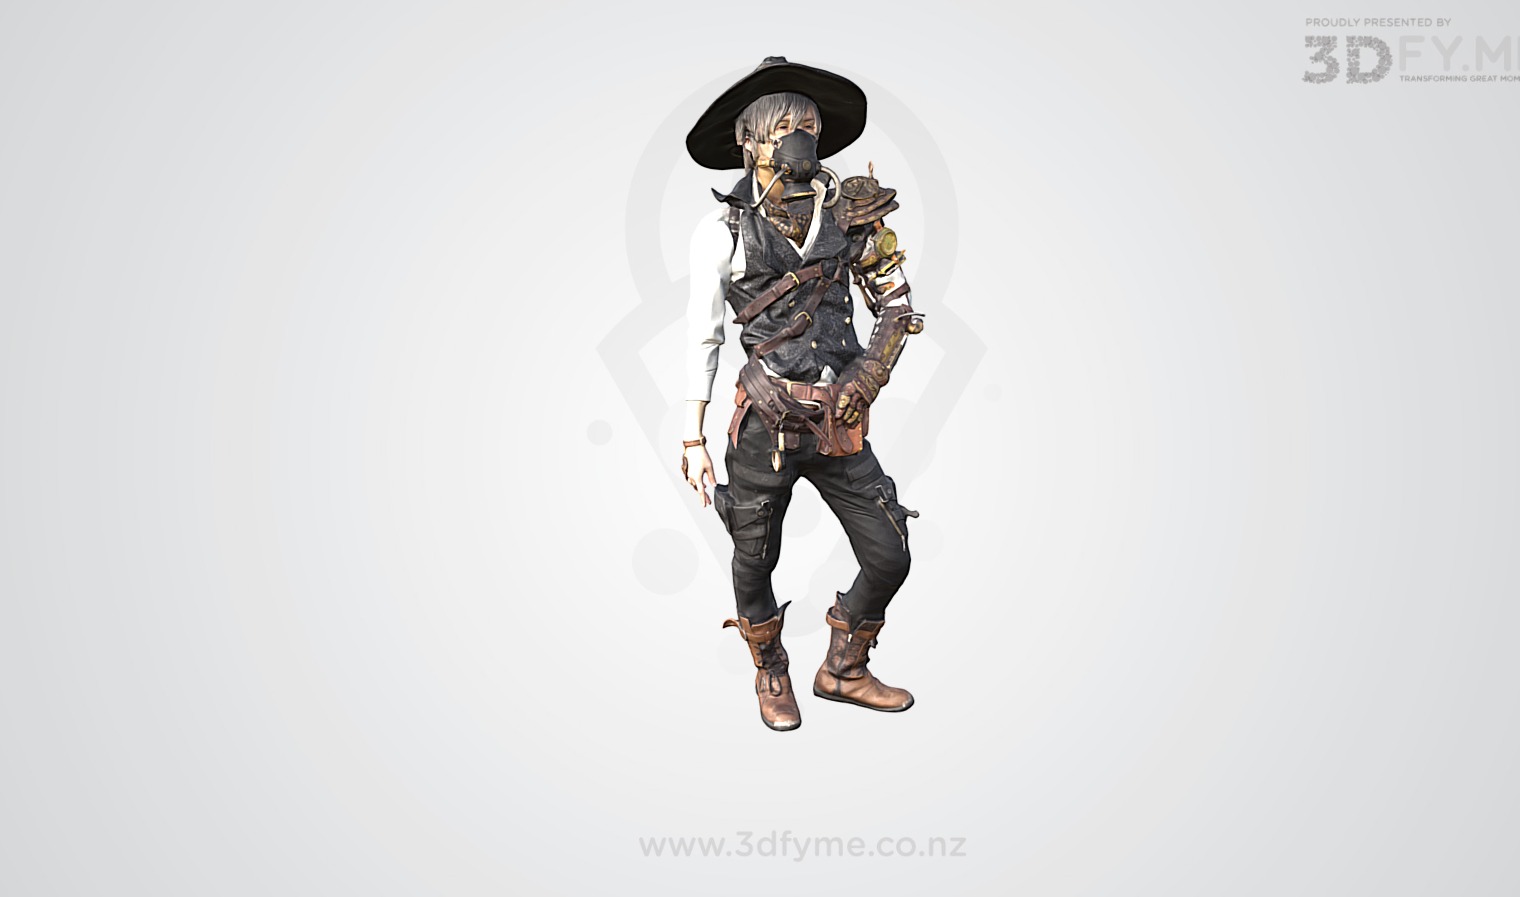 We are delighted to showcase Shingo's cool costume design from the ArmageddonExpo 2016 in Auckland. Great craftsmanship and awesome design by Shingo from Tokyo.

Find out more on how you can get your creative design immortalised in 3D by visiting: http://3dfyme.co.nz - Tokyo Space Cowboy - 3D model by 3Dfy.me New Zealand (@smacher2016) 3d model